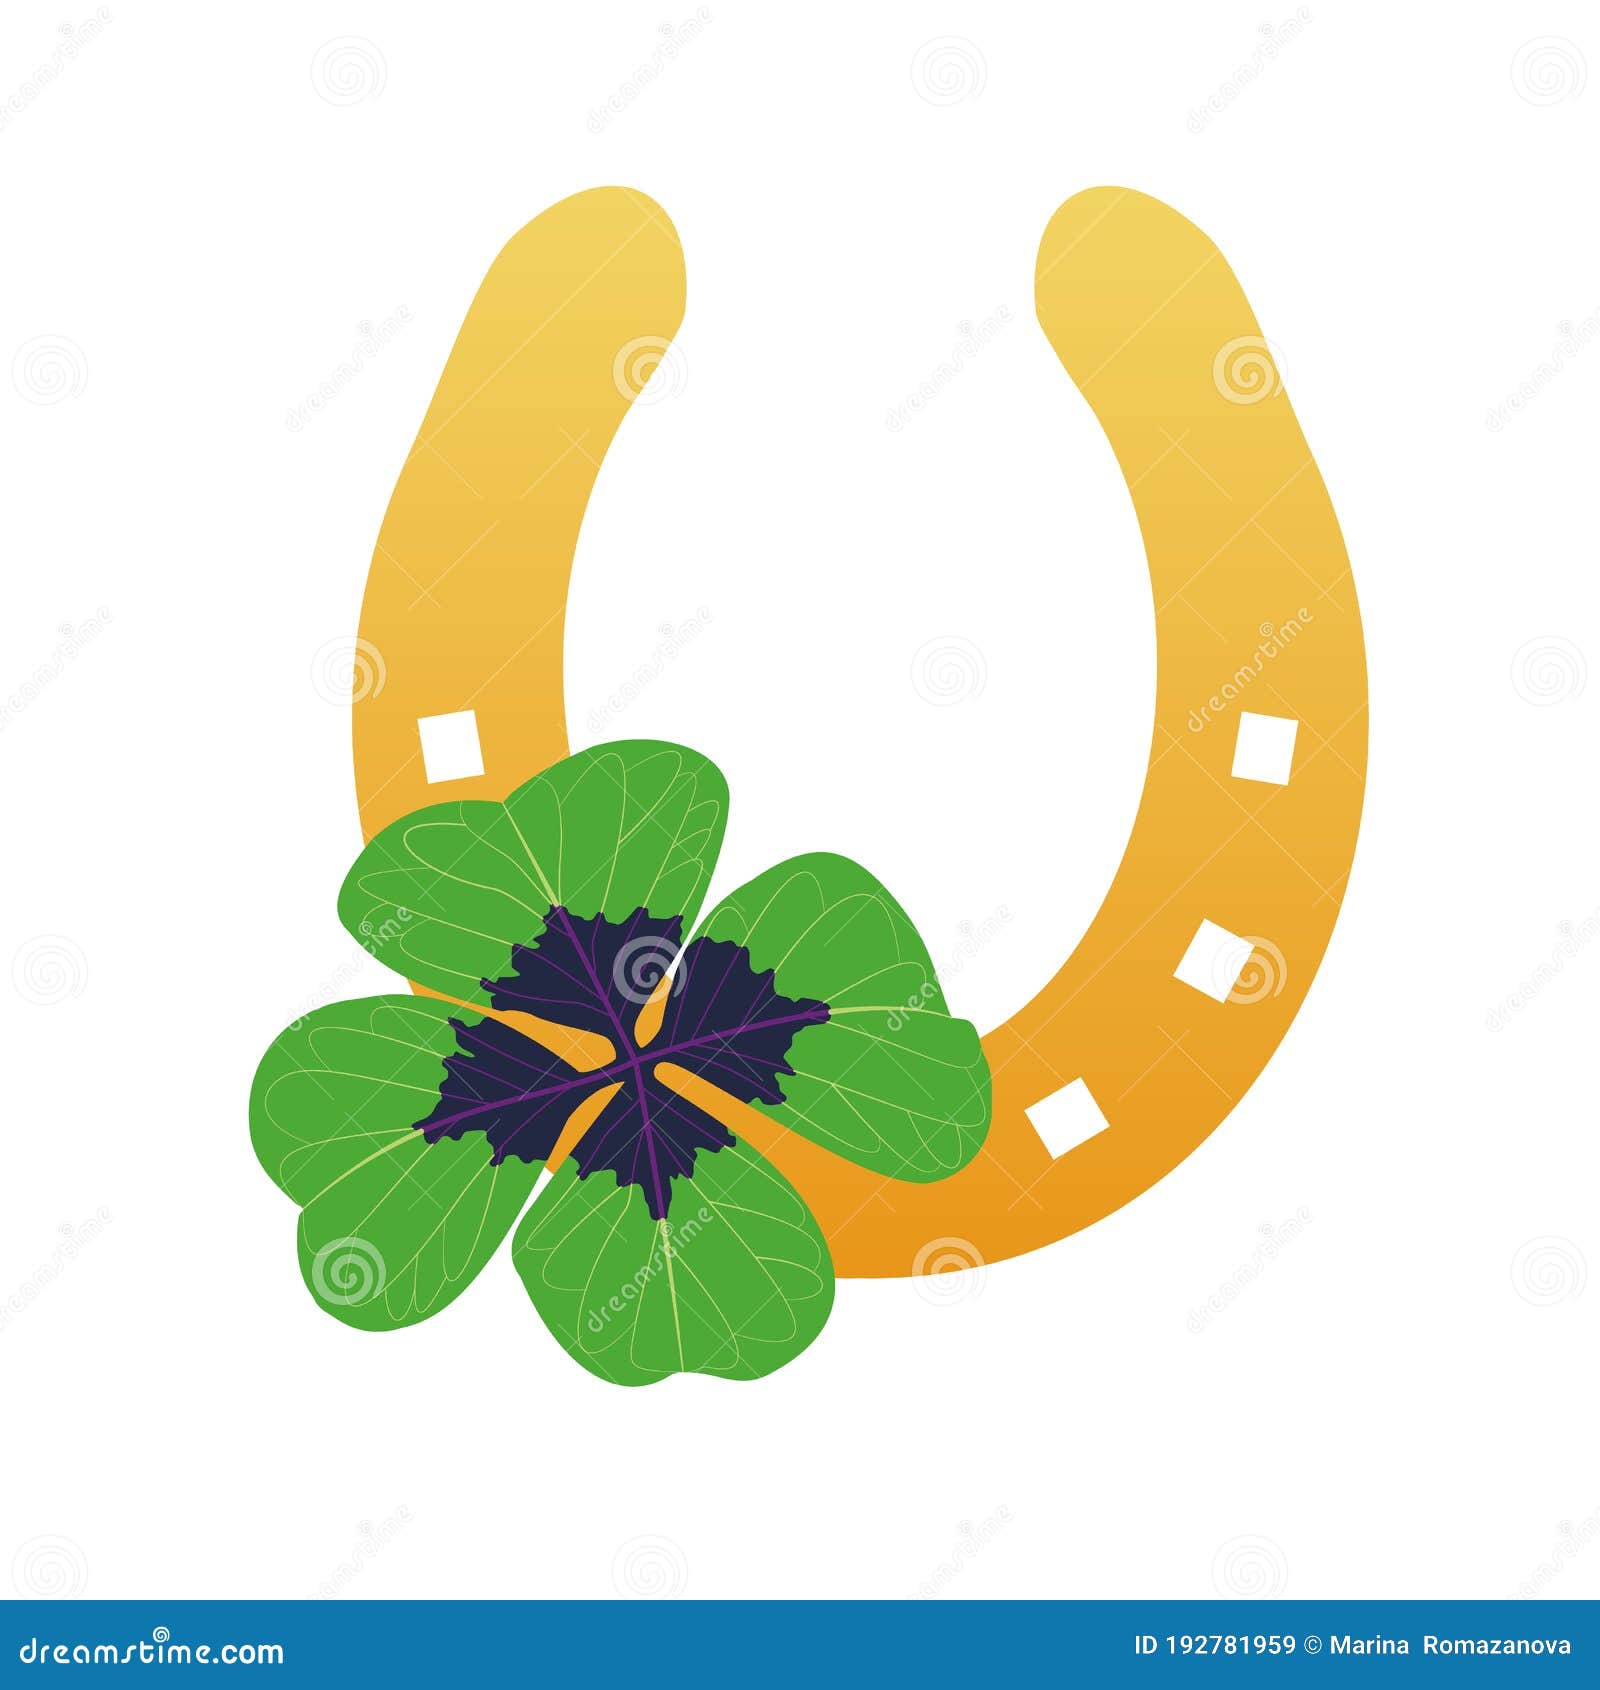 gold horseshoe with four leaf clover. lucky s.